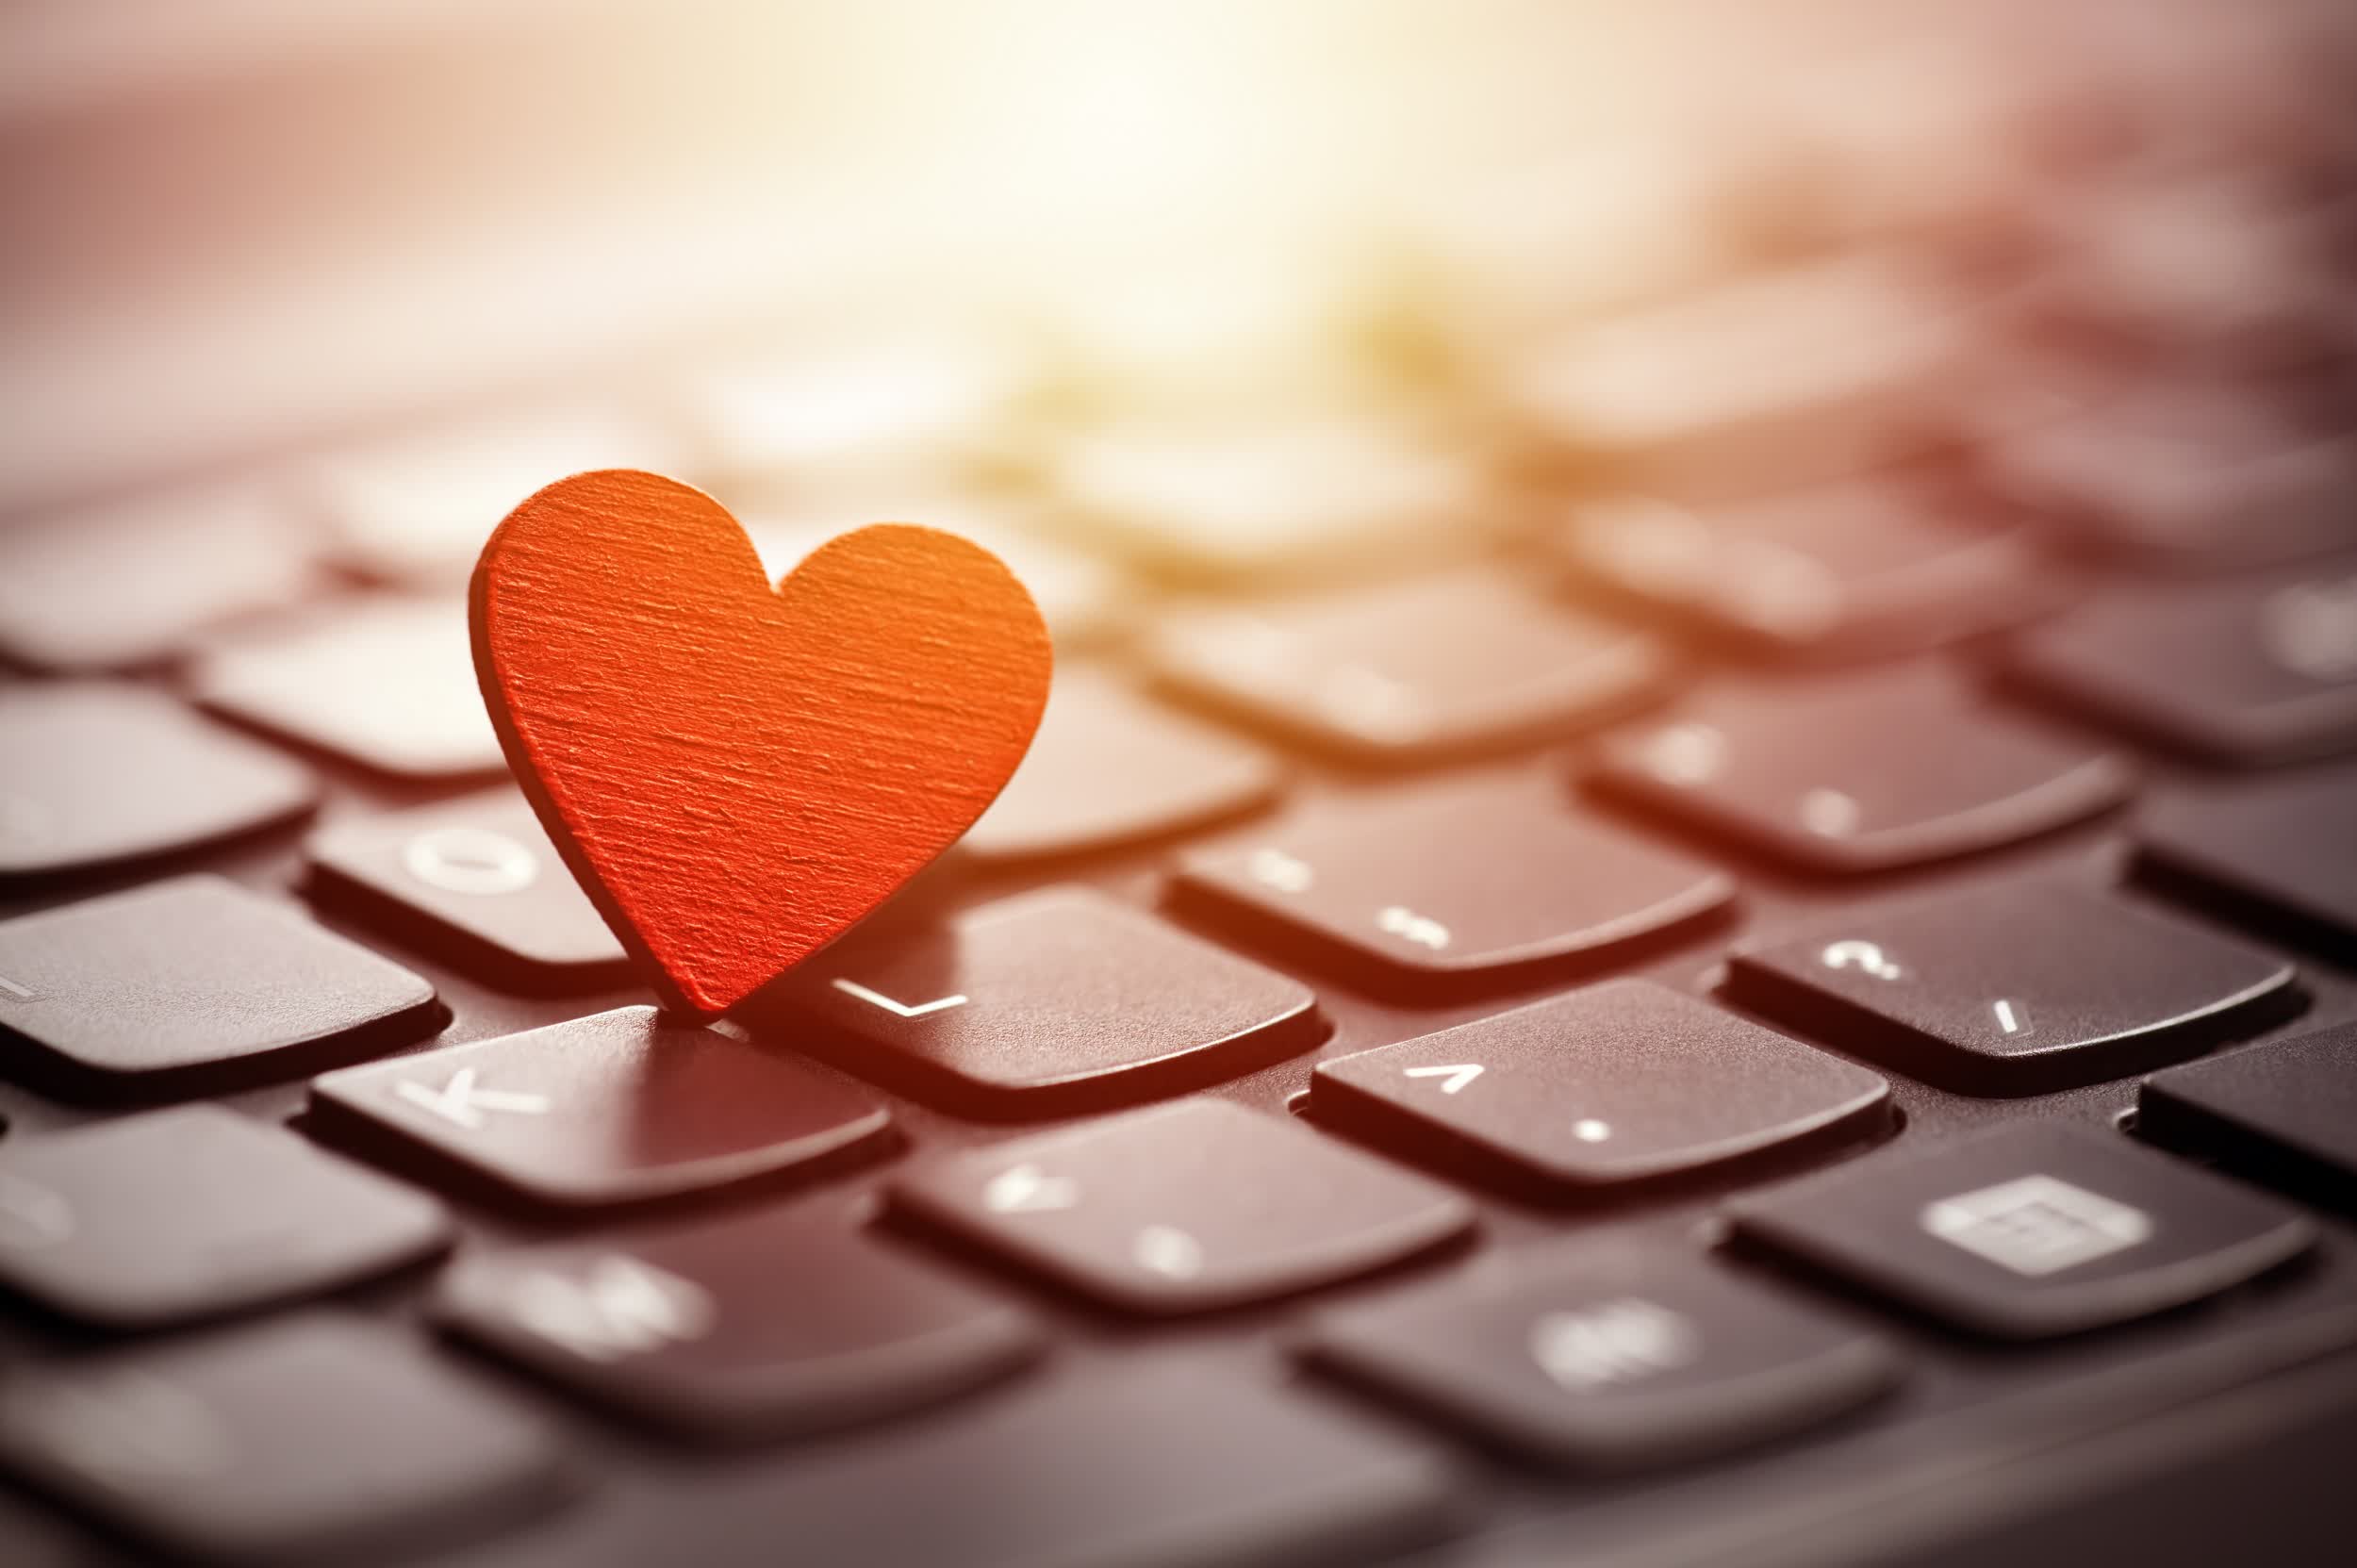 How the pandemic and politics are affecting online dating